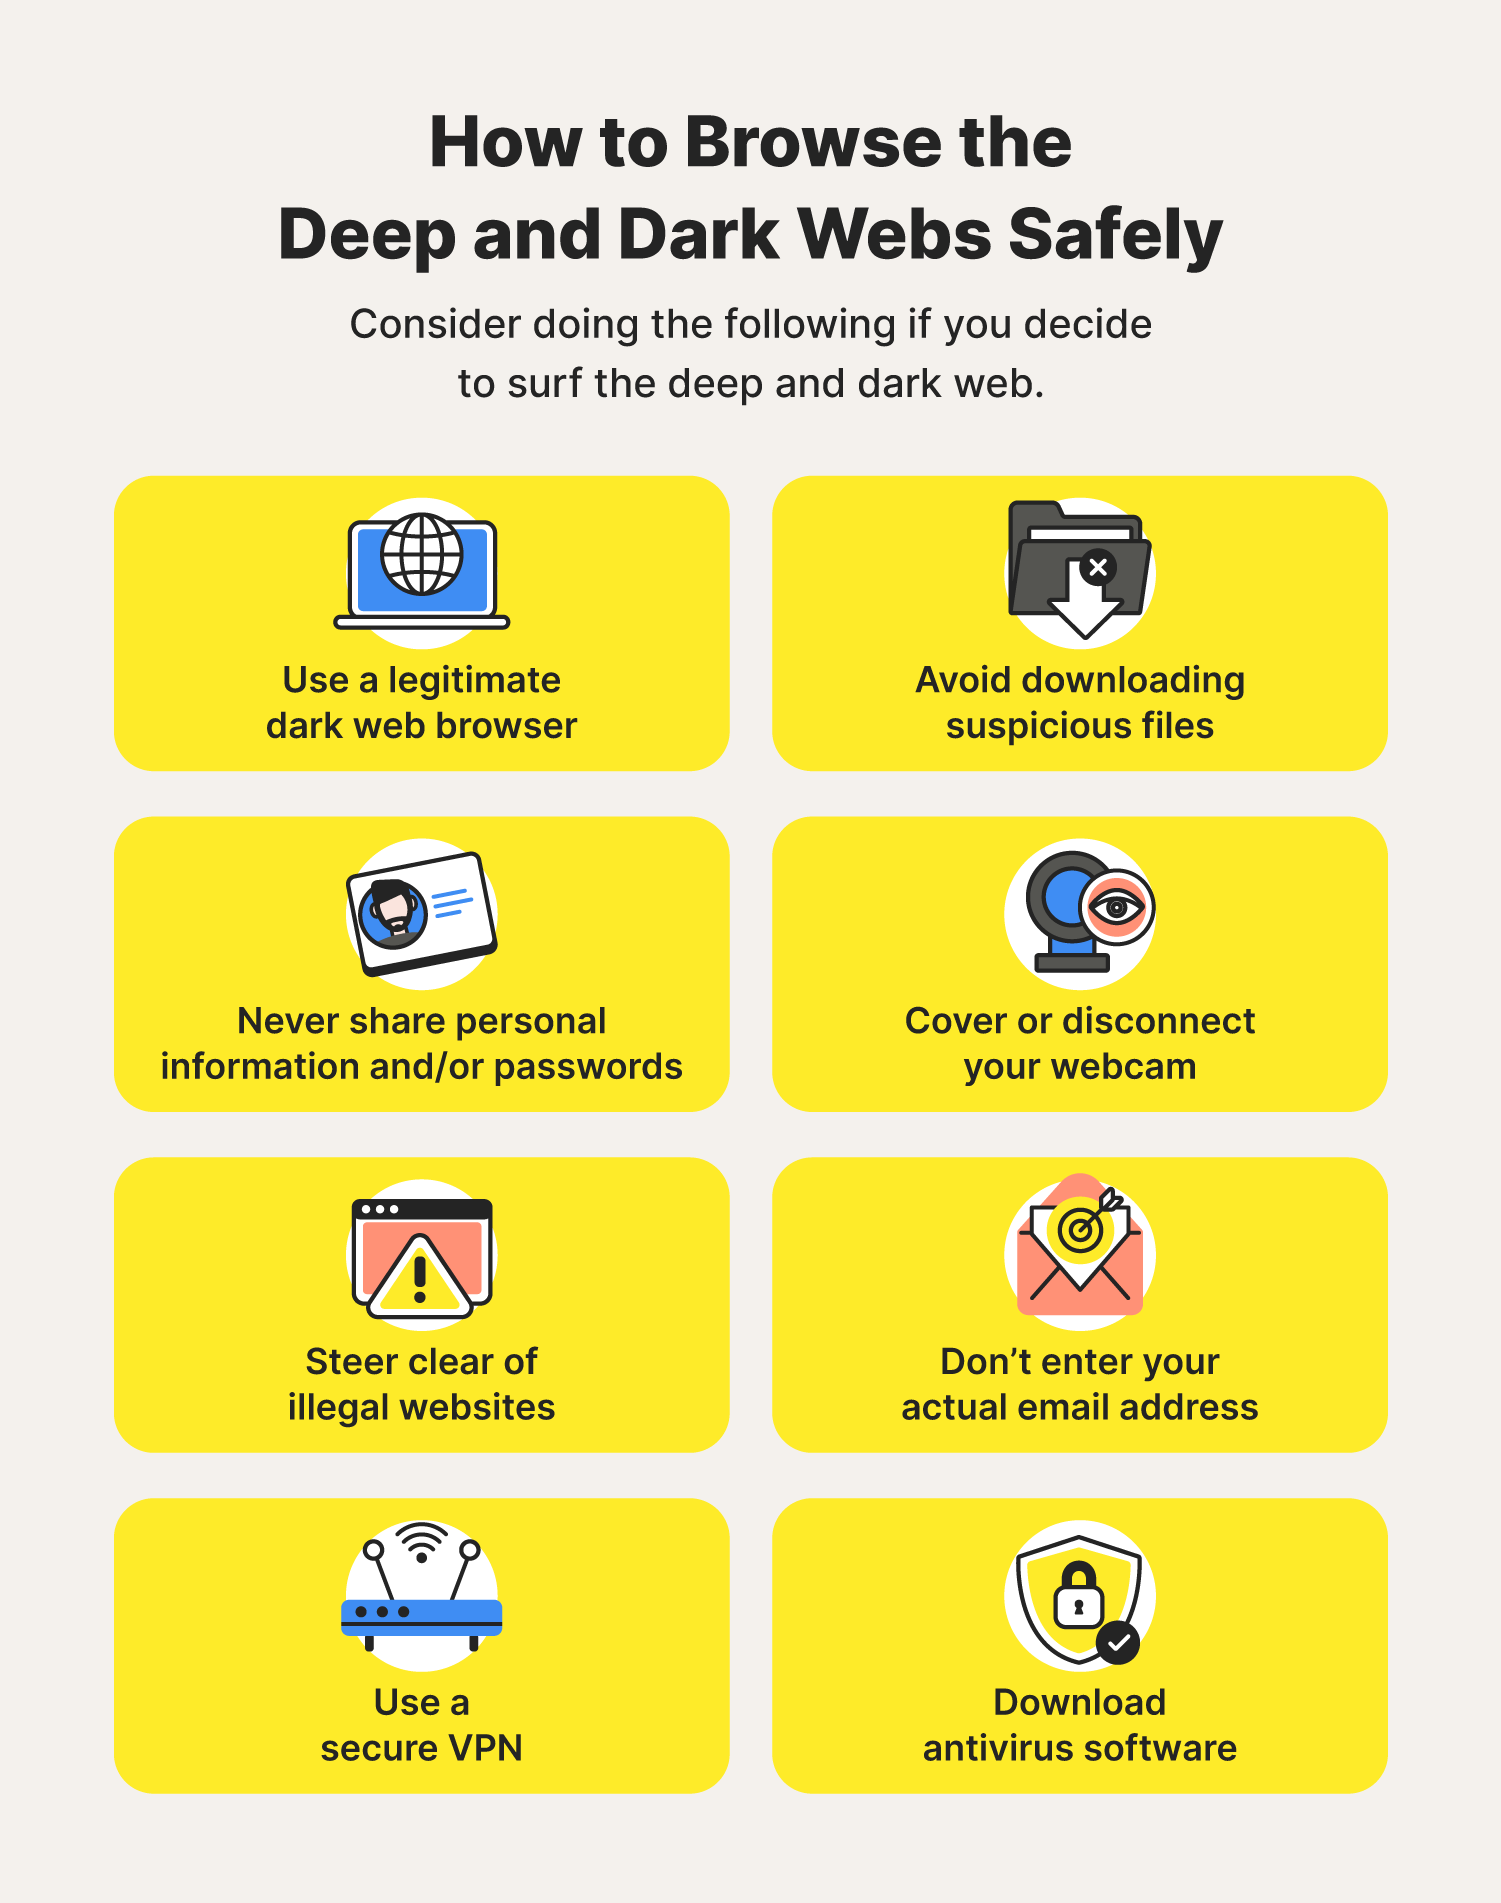 Eight illustrations accompany browsing tips for those learning about the difference between the deep web vs. dark web.